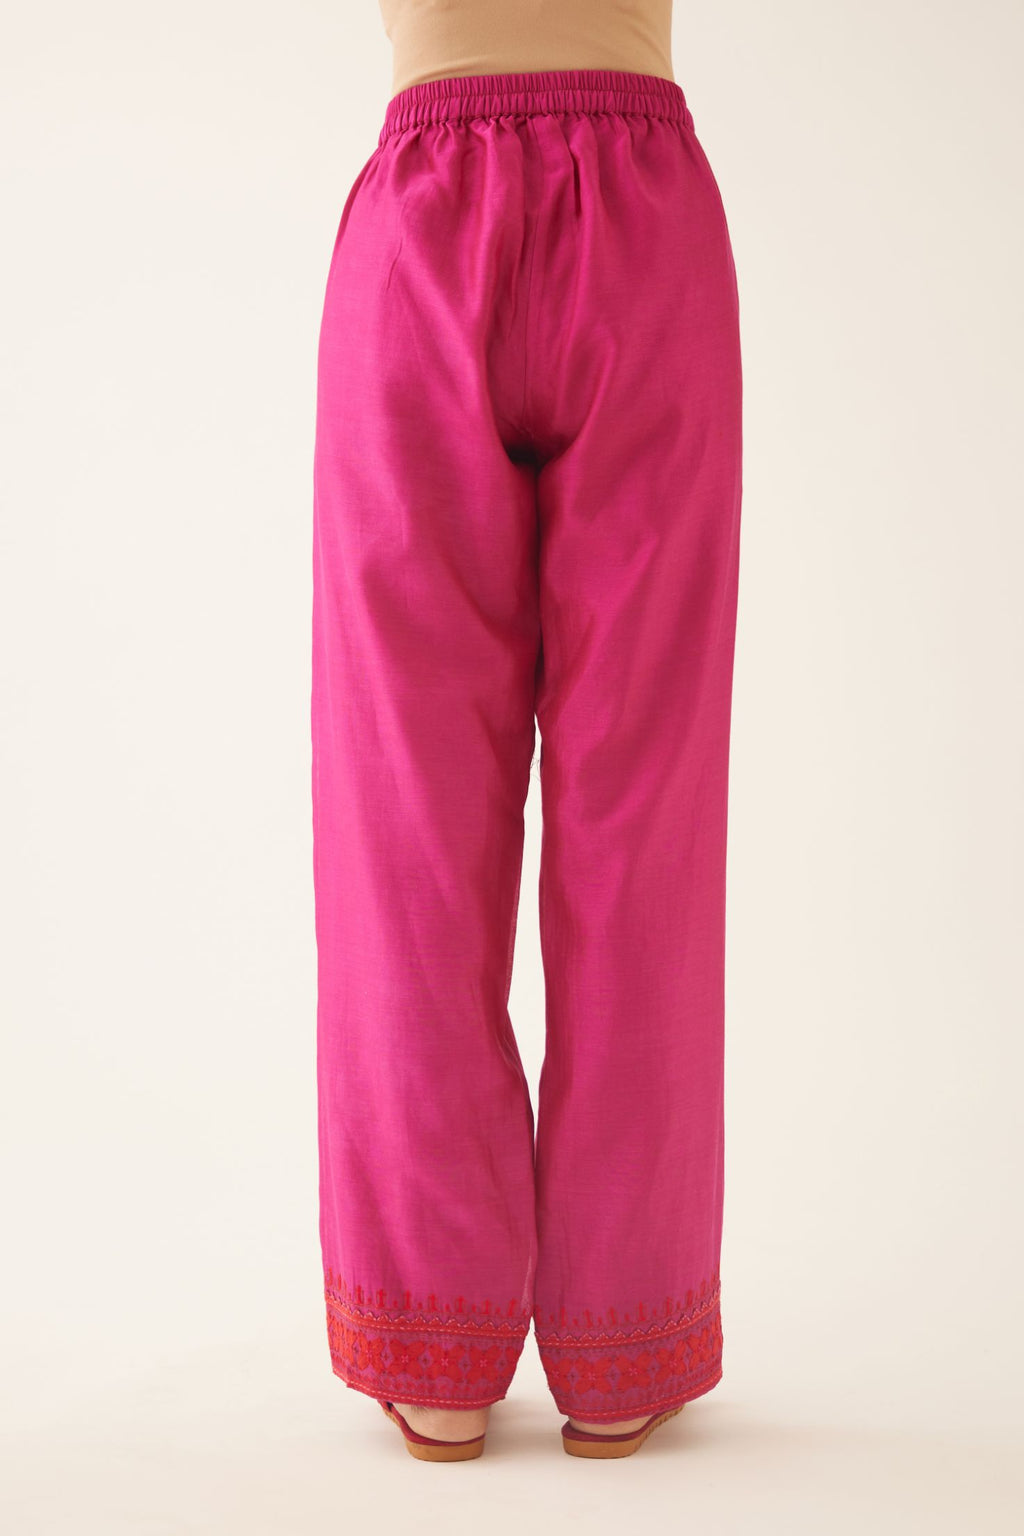 Fuchsia silk chanderi straight pants detailed with contrast red applique & kantha embroidery at hem.